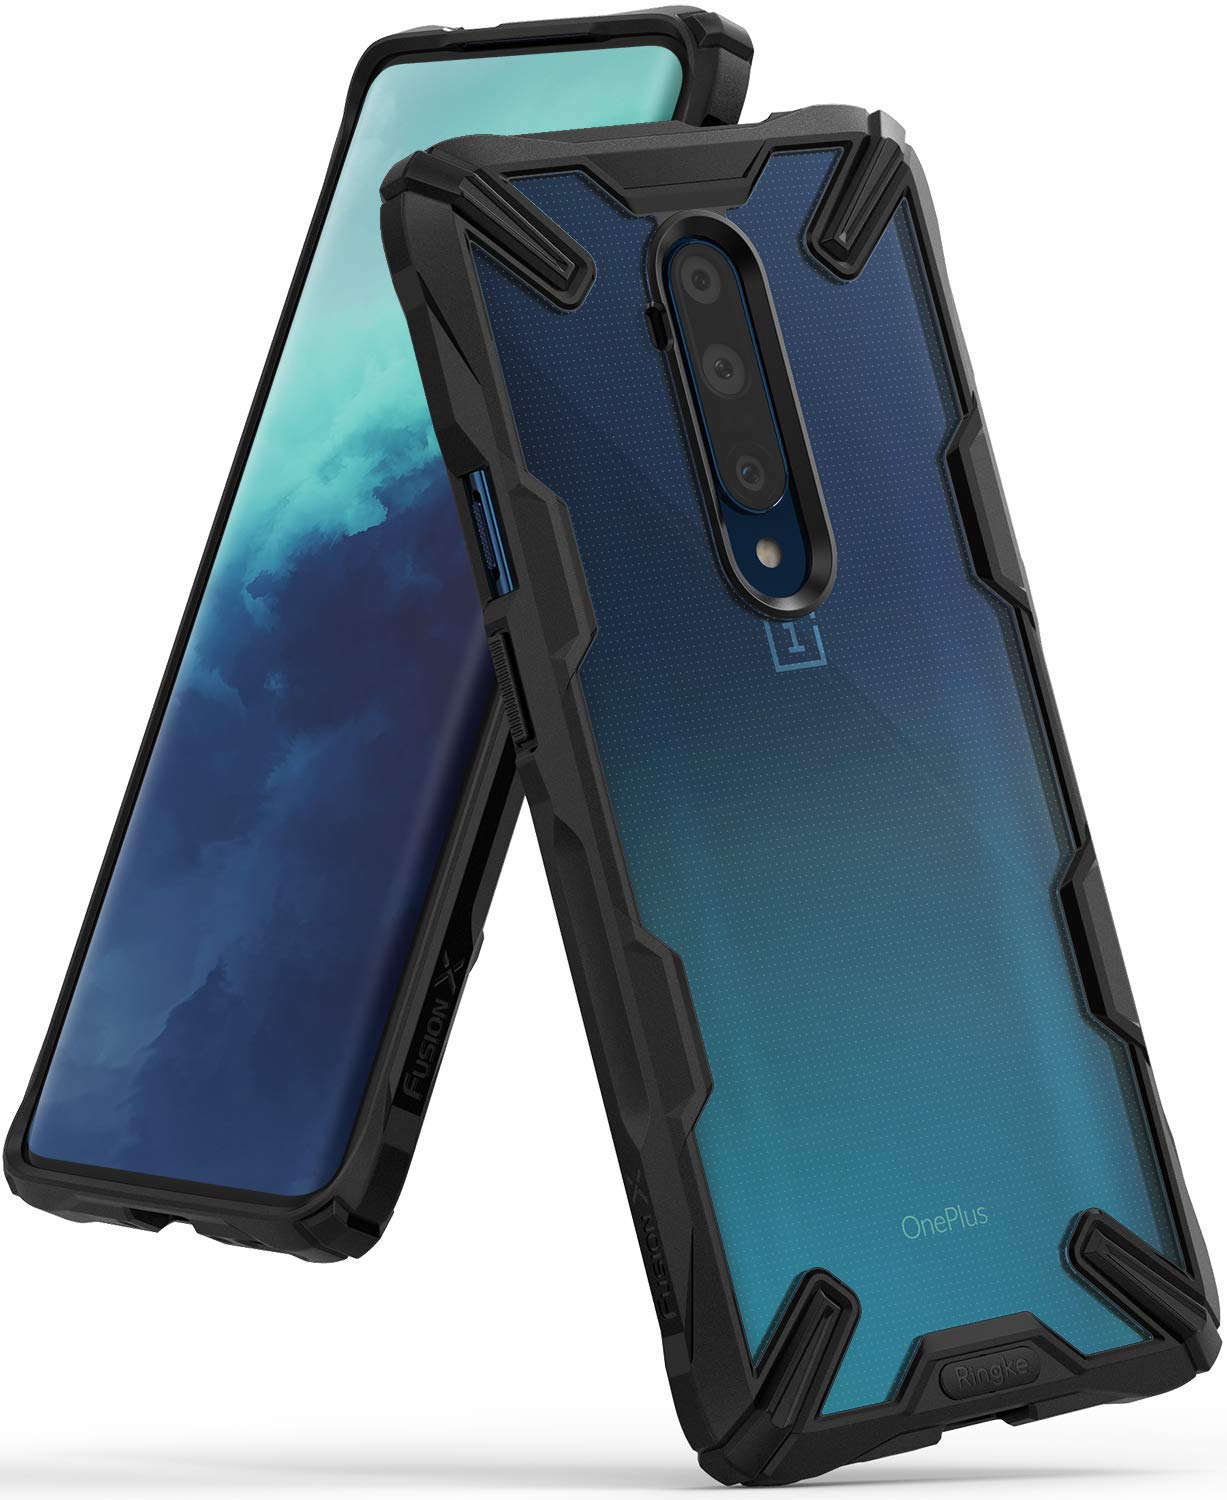 ringke fusion-x case for the oneplus 7t pro